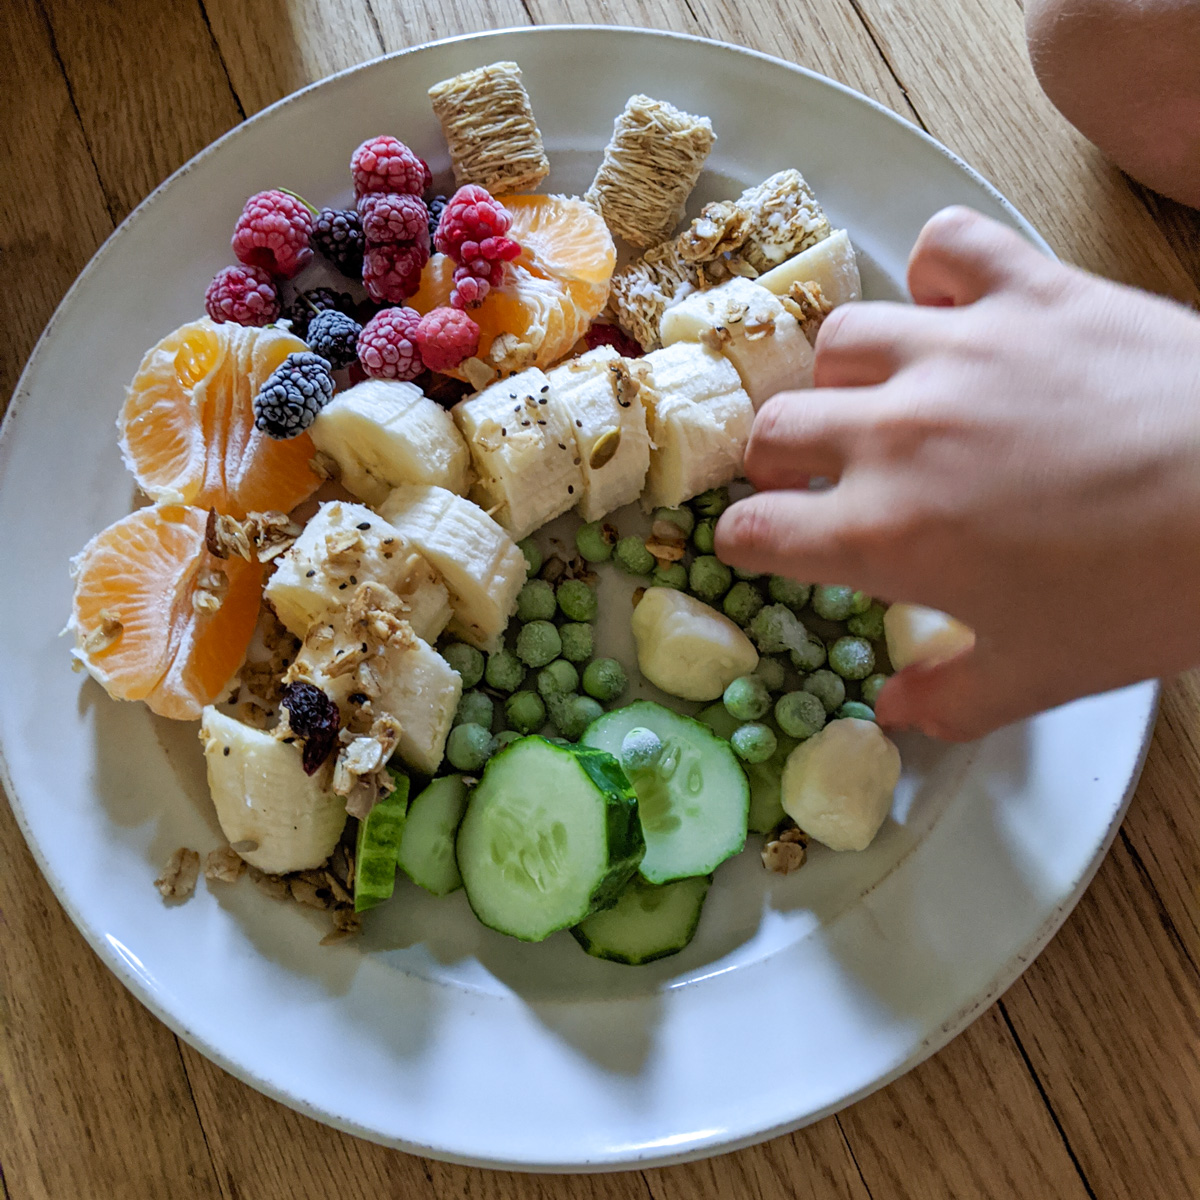 A kid's hand grabbing healthy snacks from a shared plate of fruit, vegetables, and cereal.